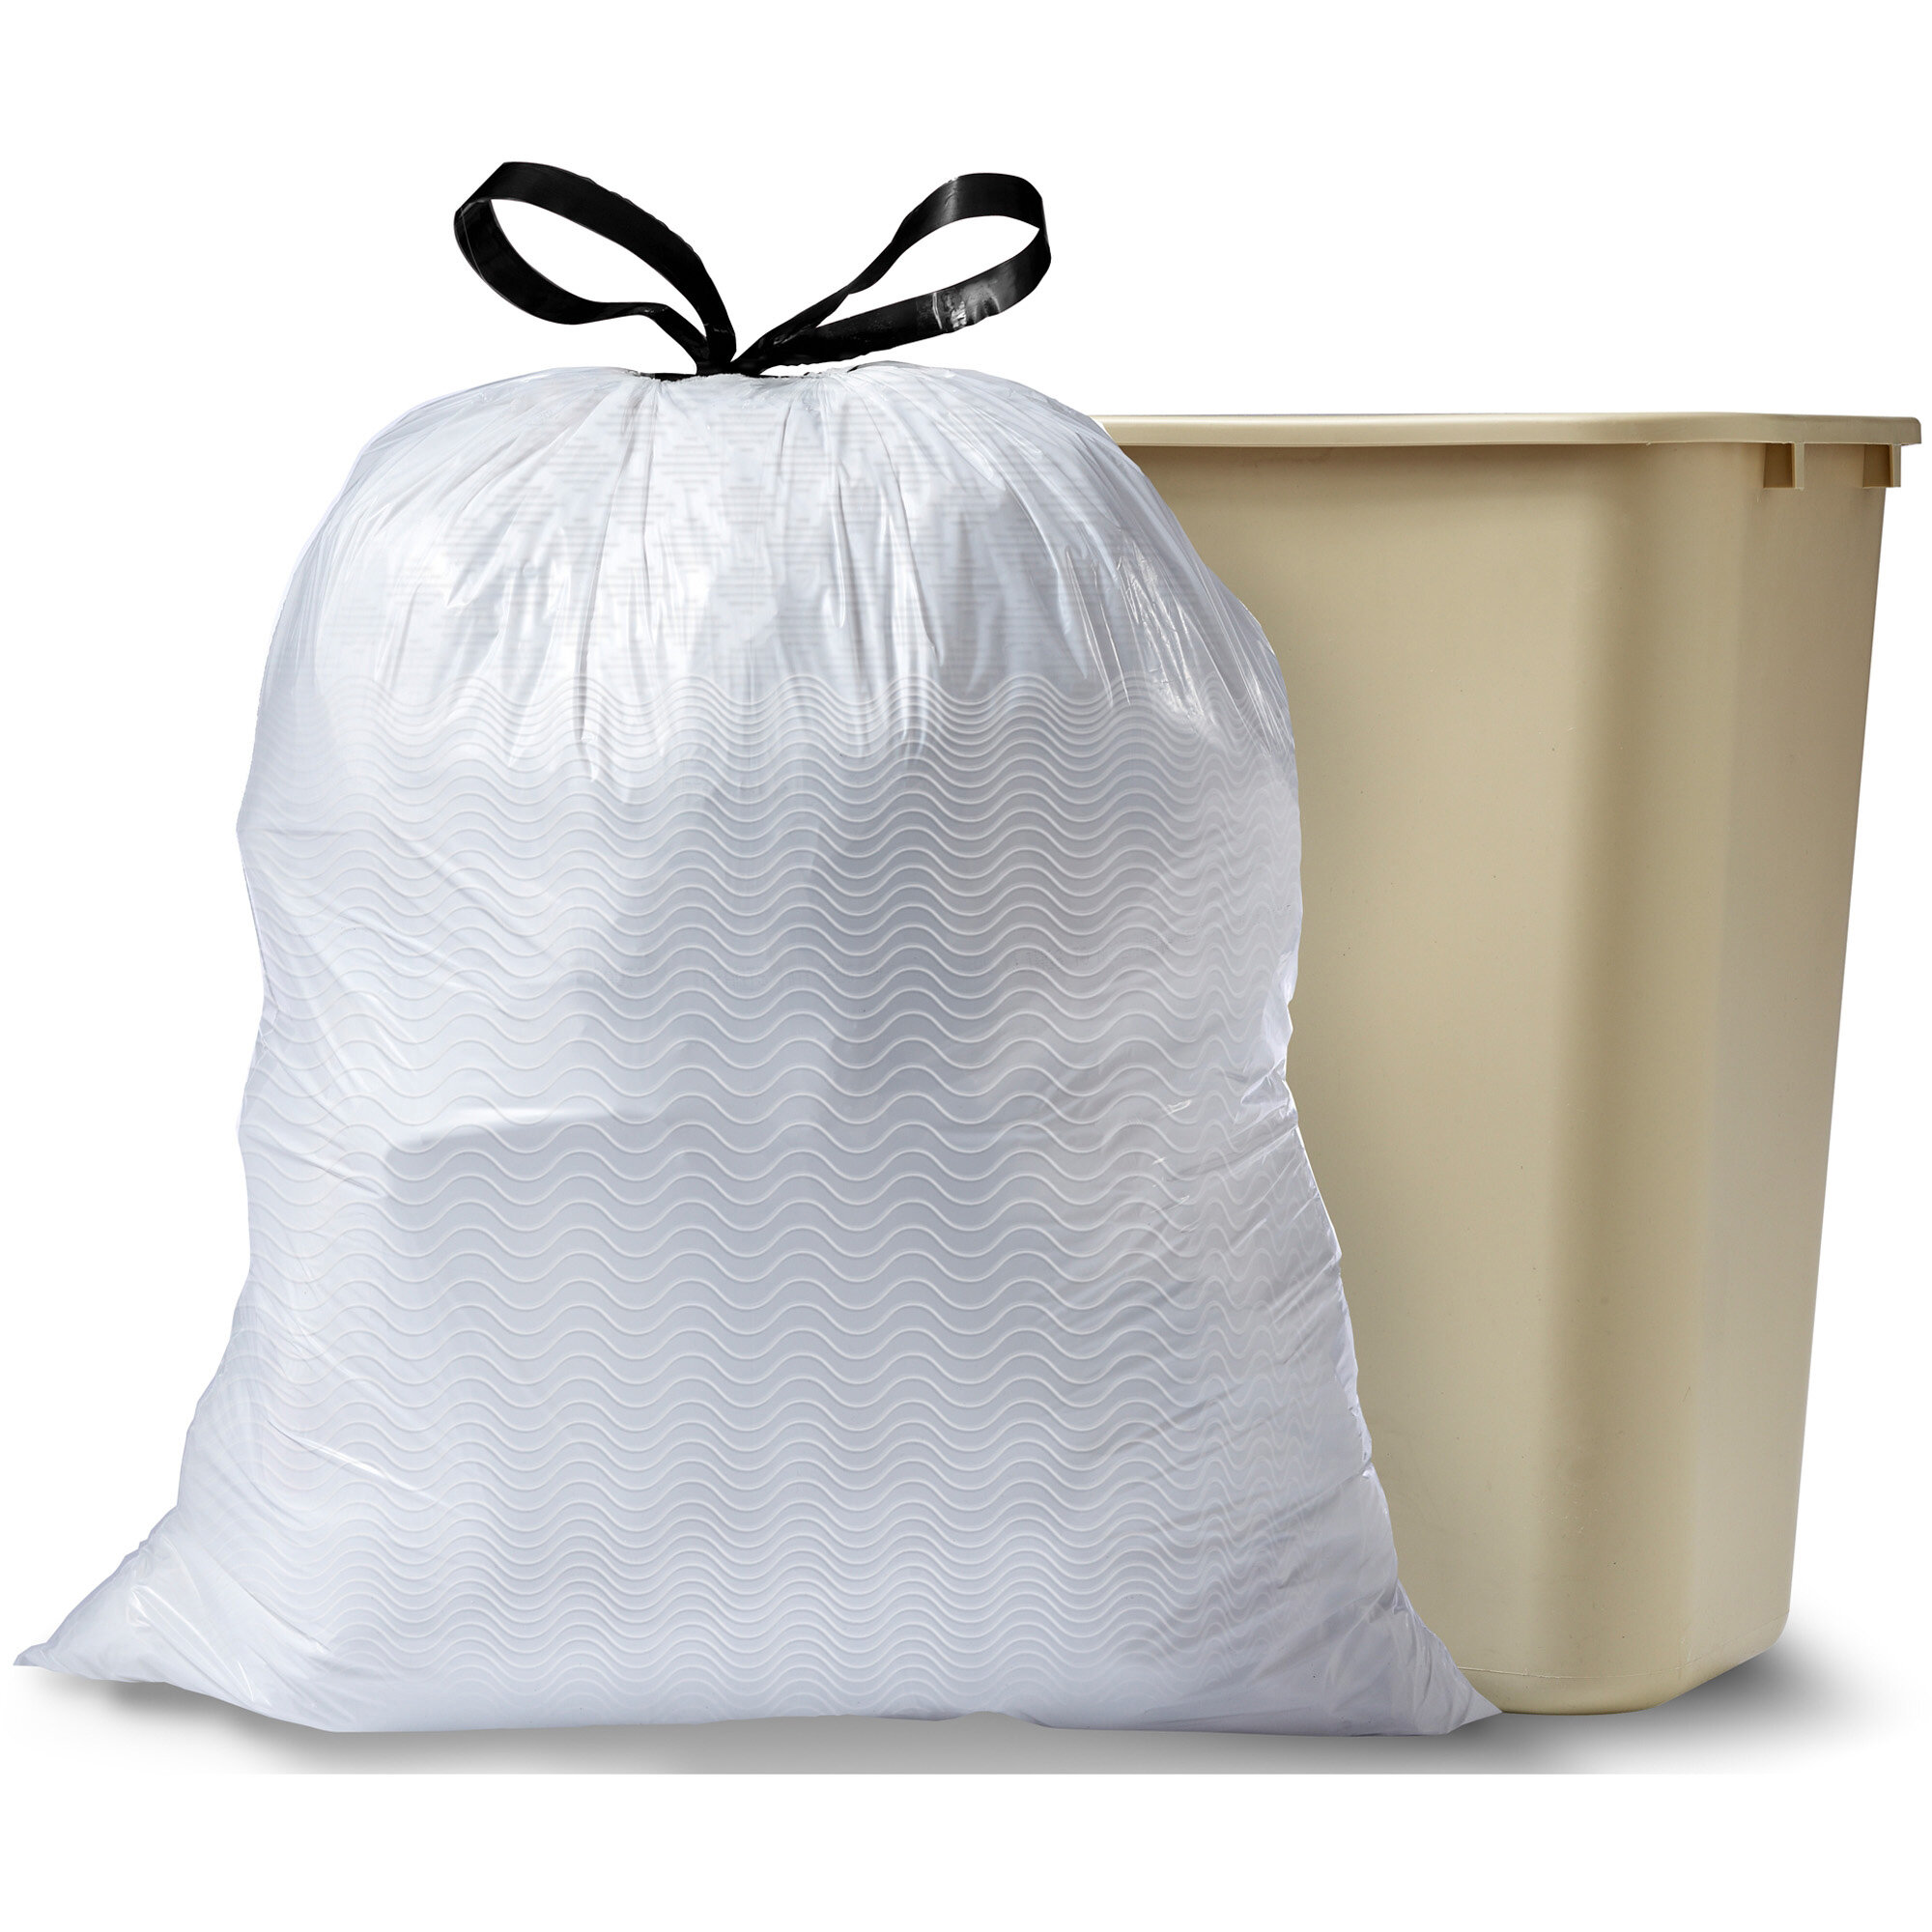 8 Gal. (23 l to 30 l) Perfectfit Trash Can Liners Code G 240 Liners  (12-Packs of 20 Liners)